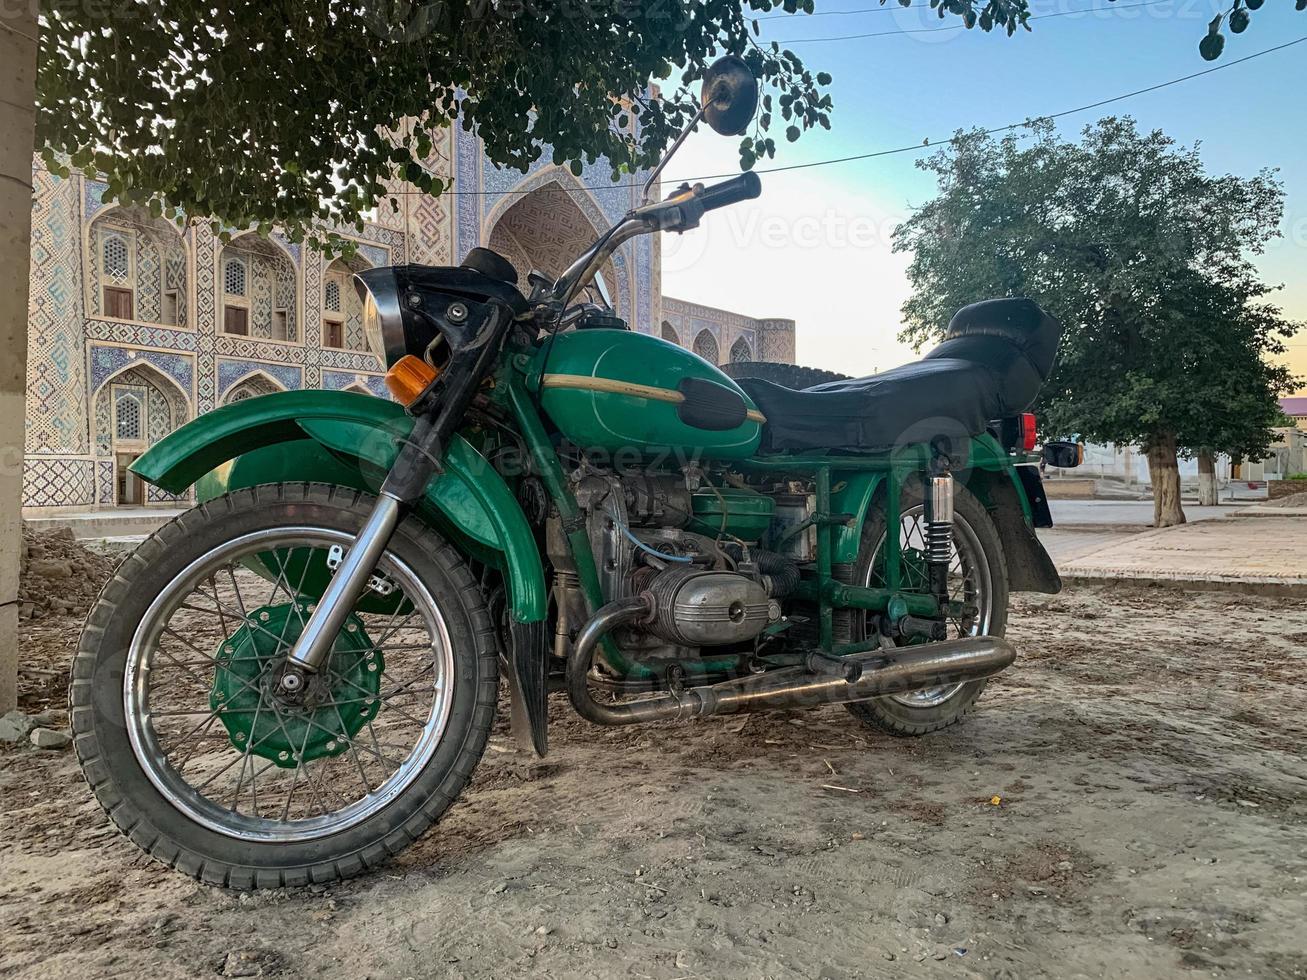 Motorcycle parked in front of a Qosh Mosque in Bukhara Uzbekistan photo